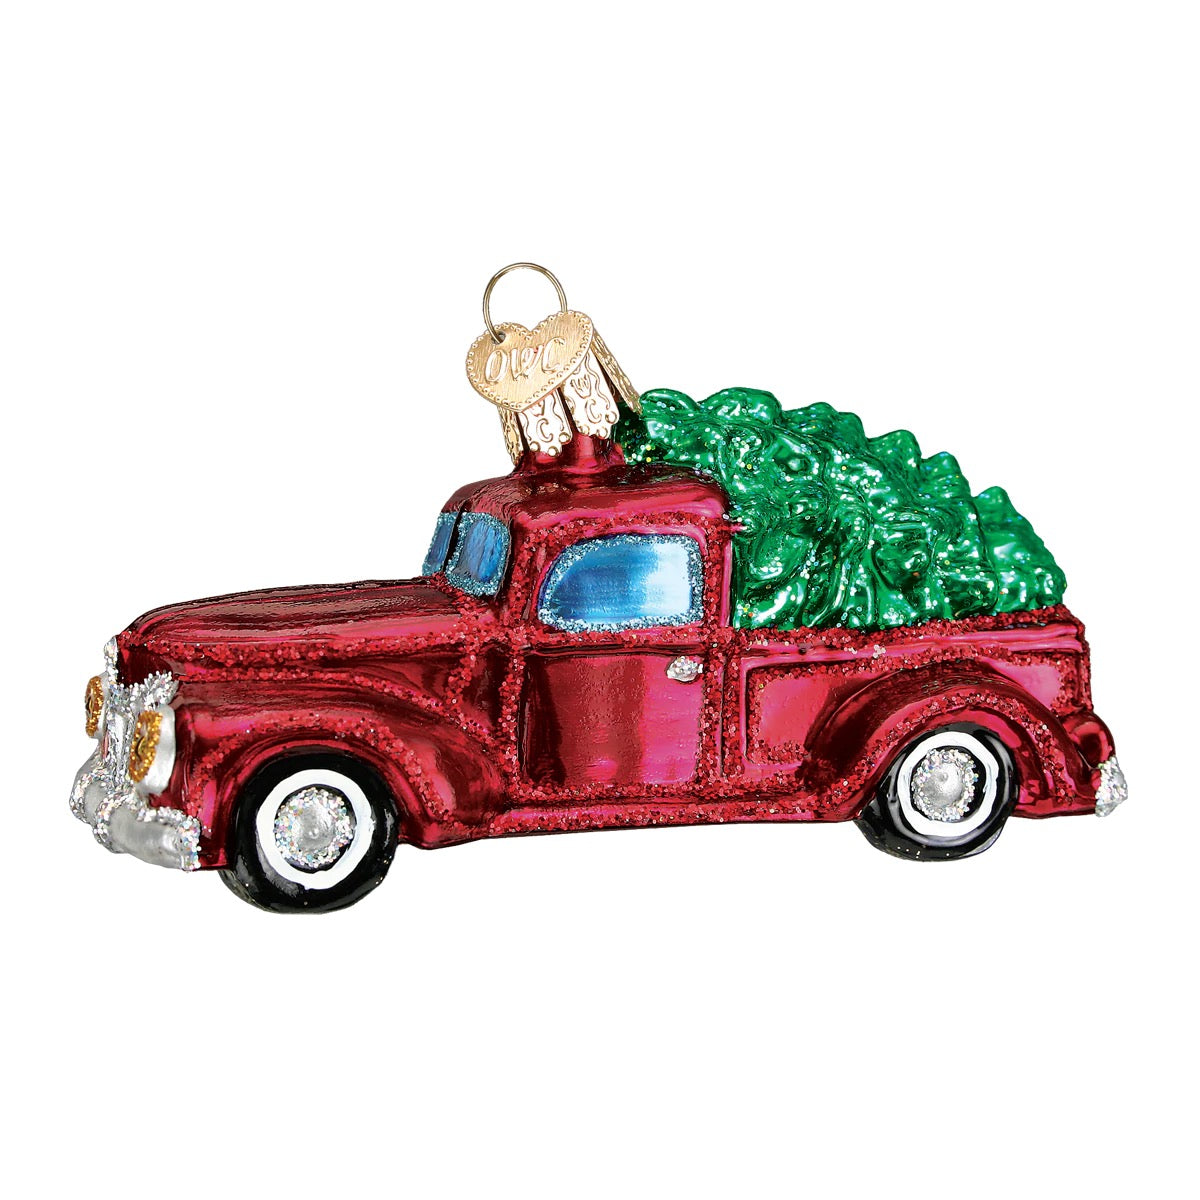 Old Truck With Tree Ornament  Old World Christmas   